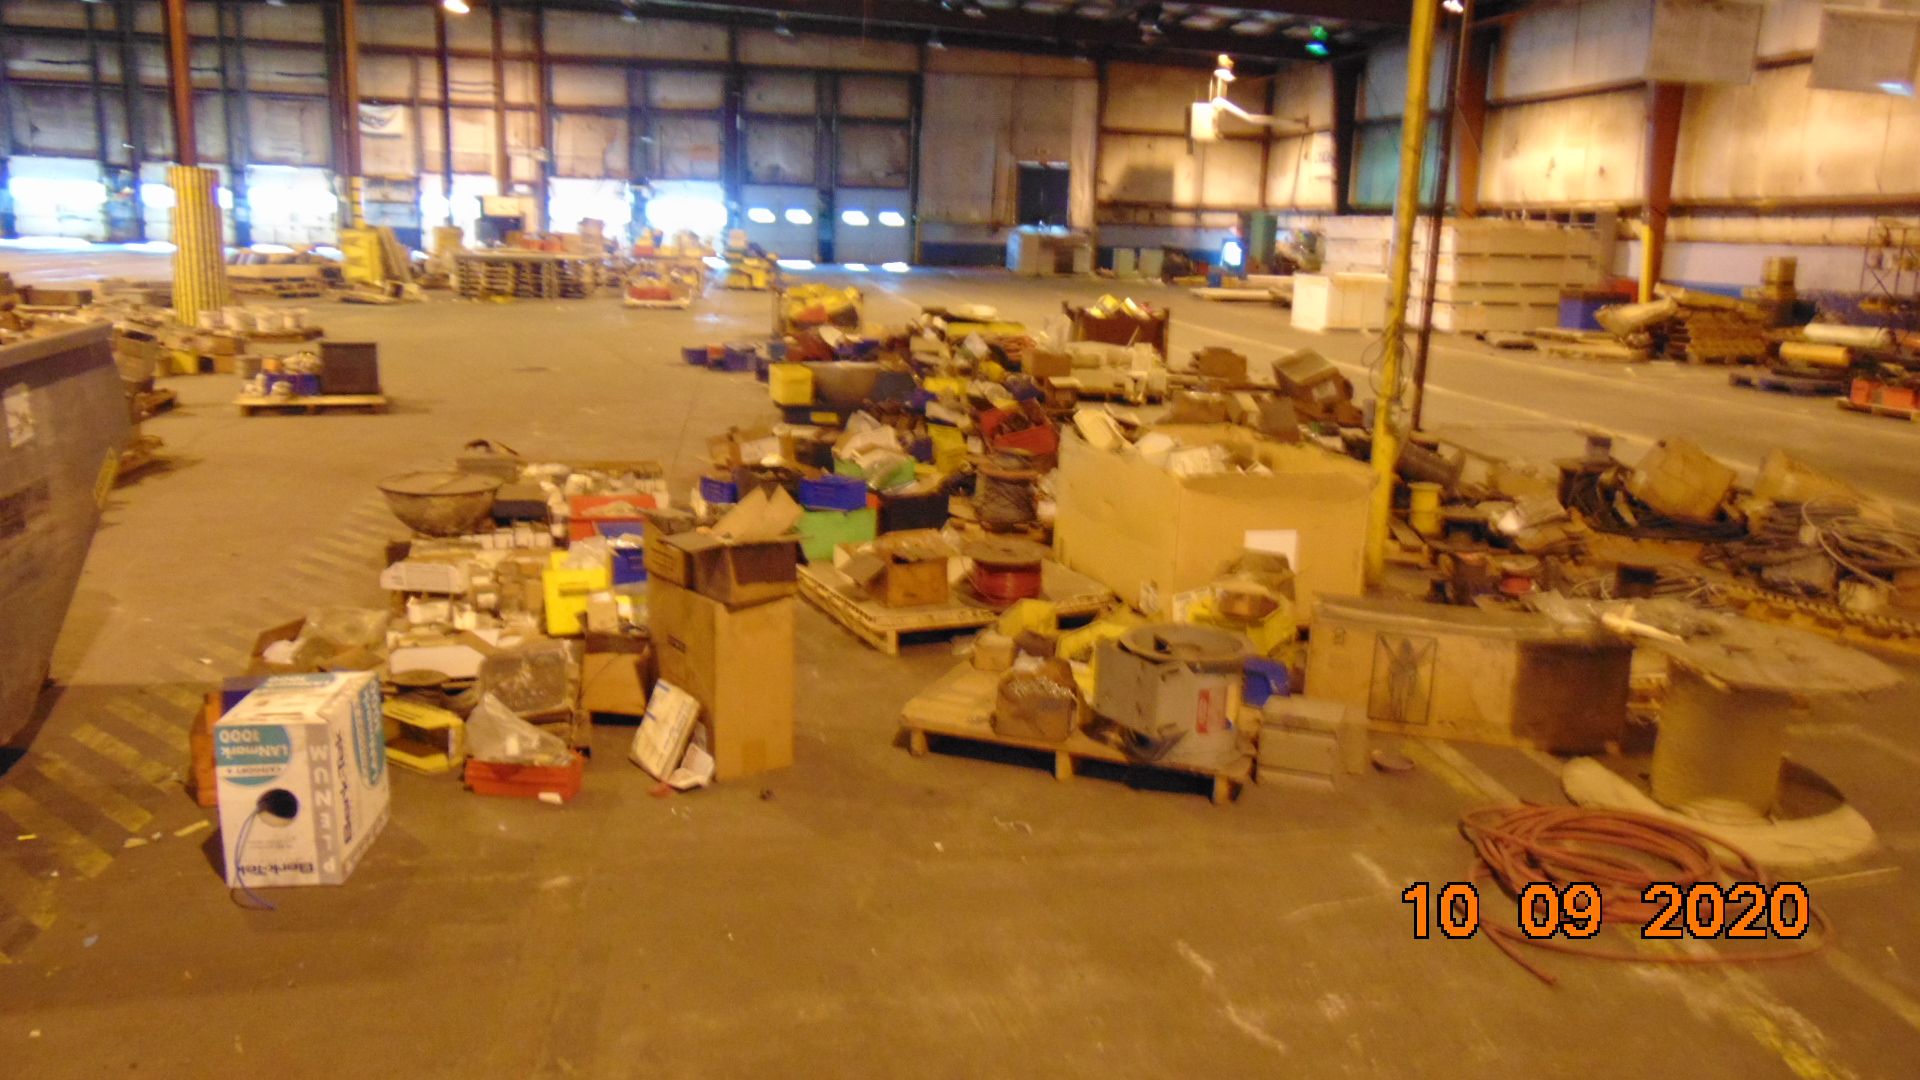 Contents of Warehouse / Industrial Building - Image 17 of 26